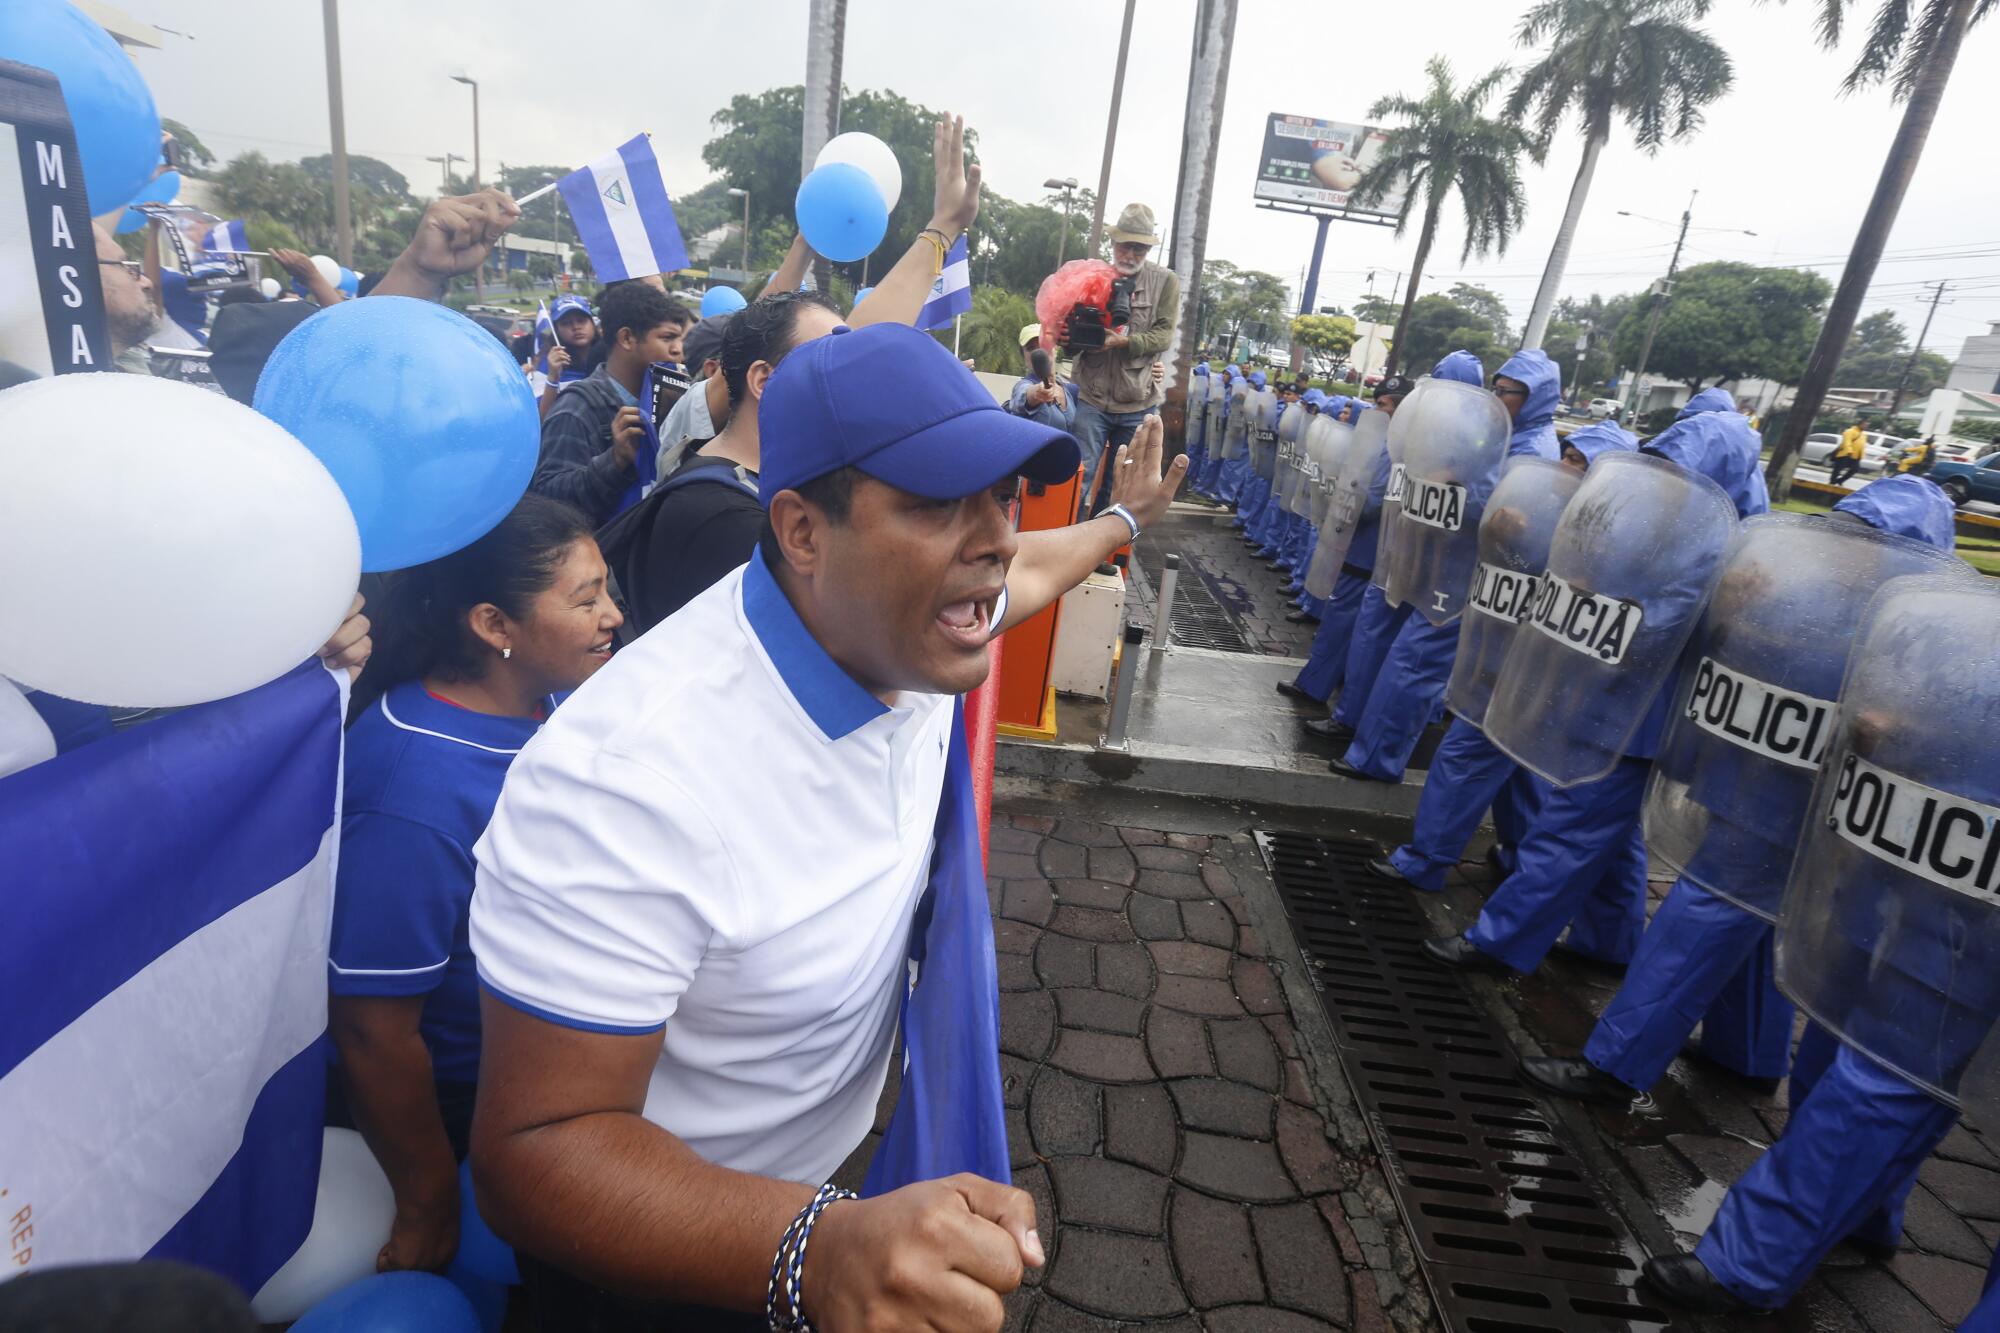 An anti-government protest in Nicaragua